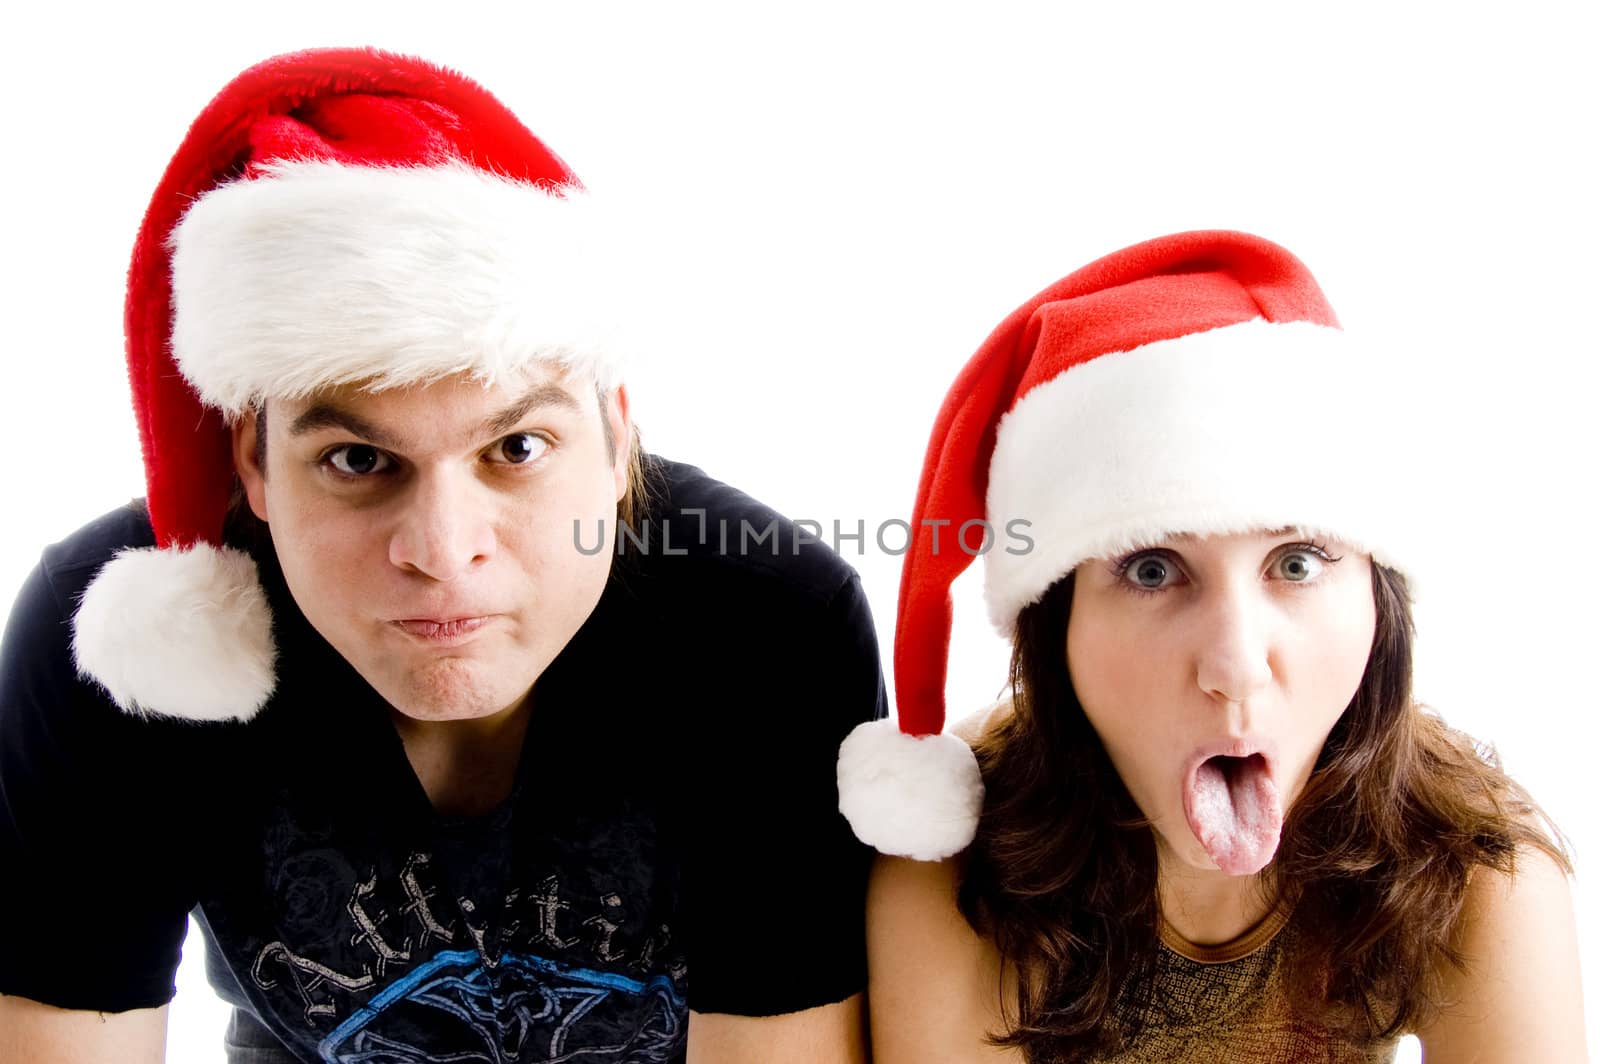 couple with christmas hat and making faces by imagerymajestic